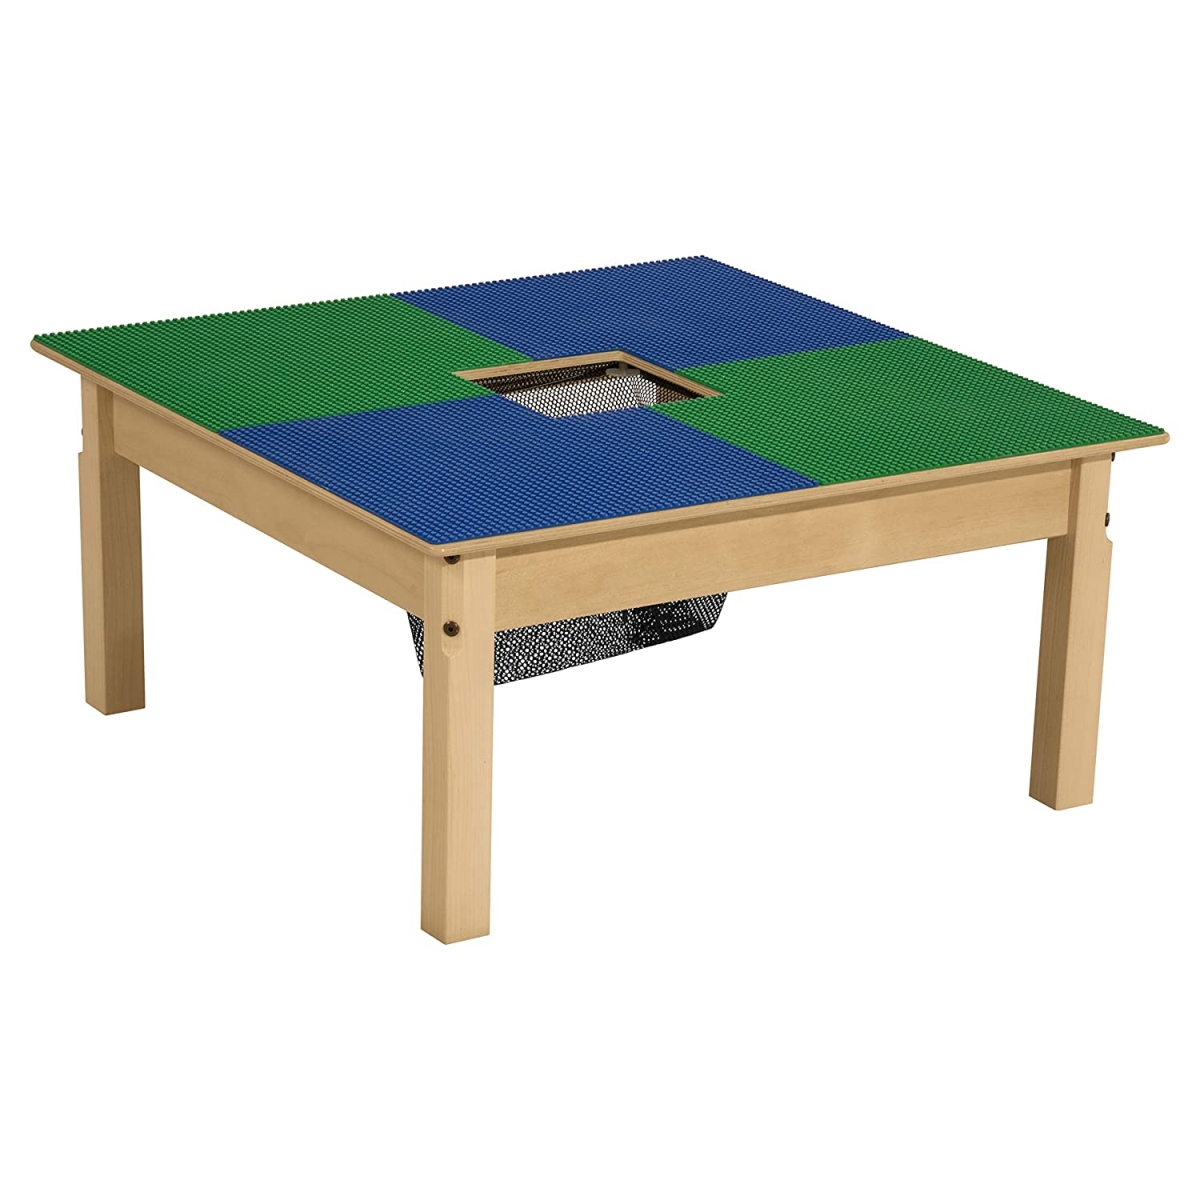 Tp3131sgn22-bg 22 In. Lego Compatible Table With Legs, Blue & Green - Square